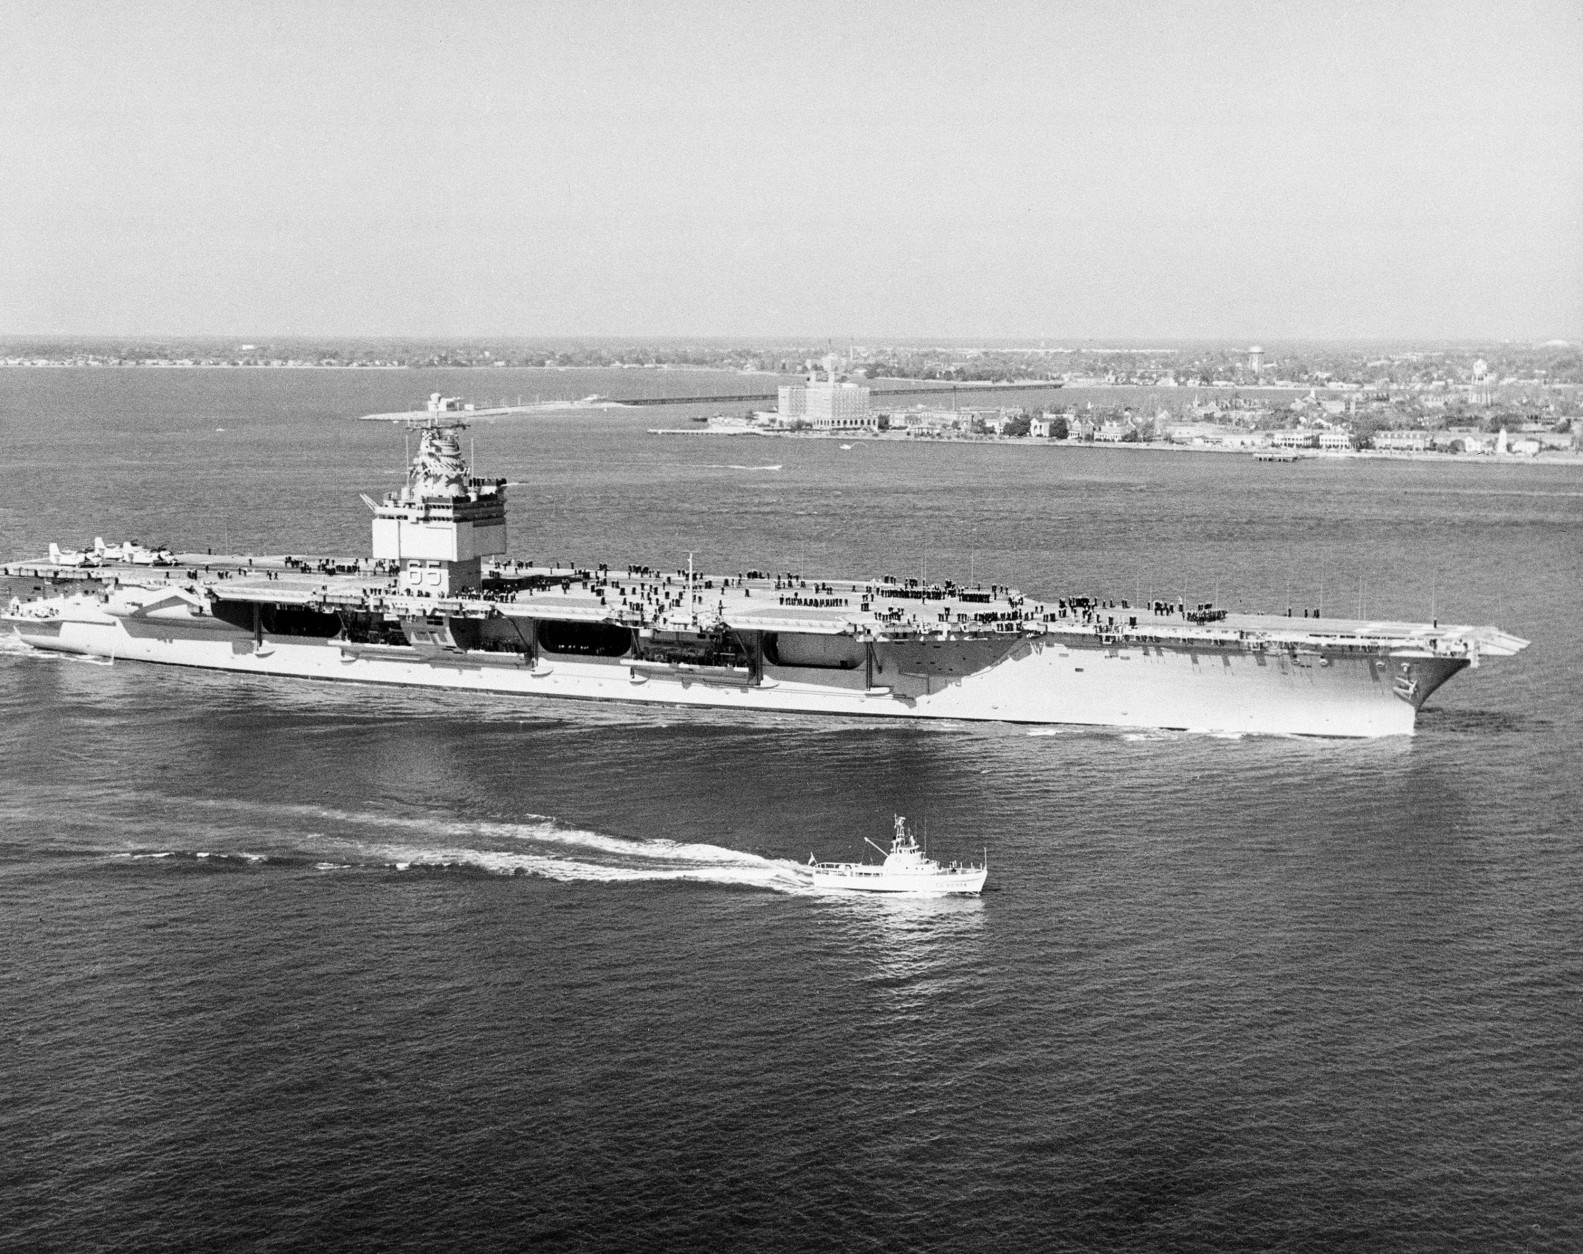 The USS Enterprise, the Navy's newest nuclear-powered aircraft carrier, is shown in a 1961 photo.  (AP Photo)